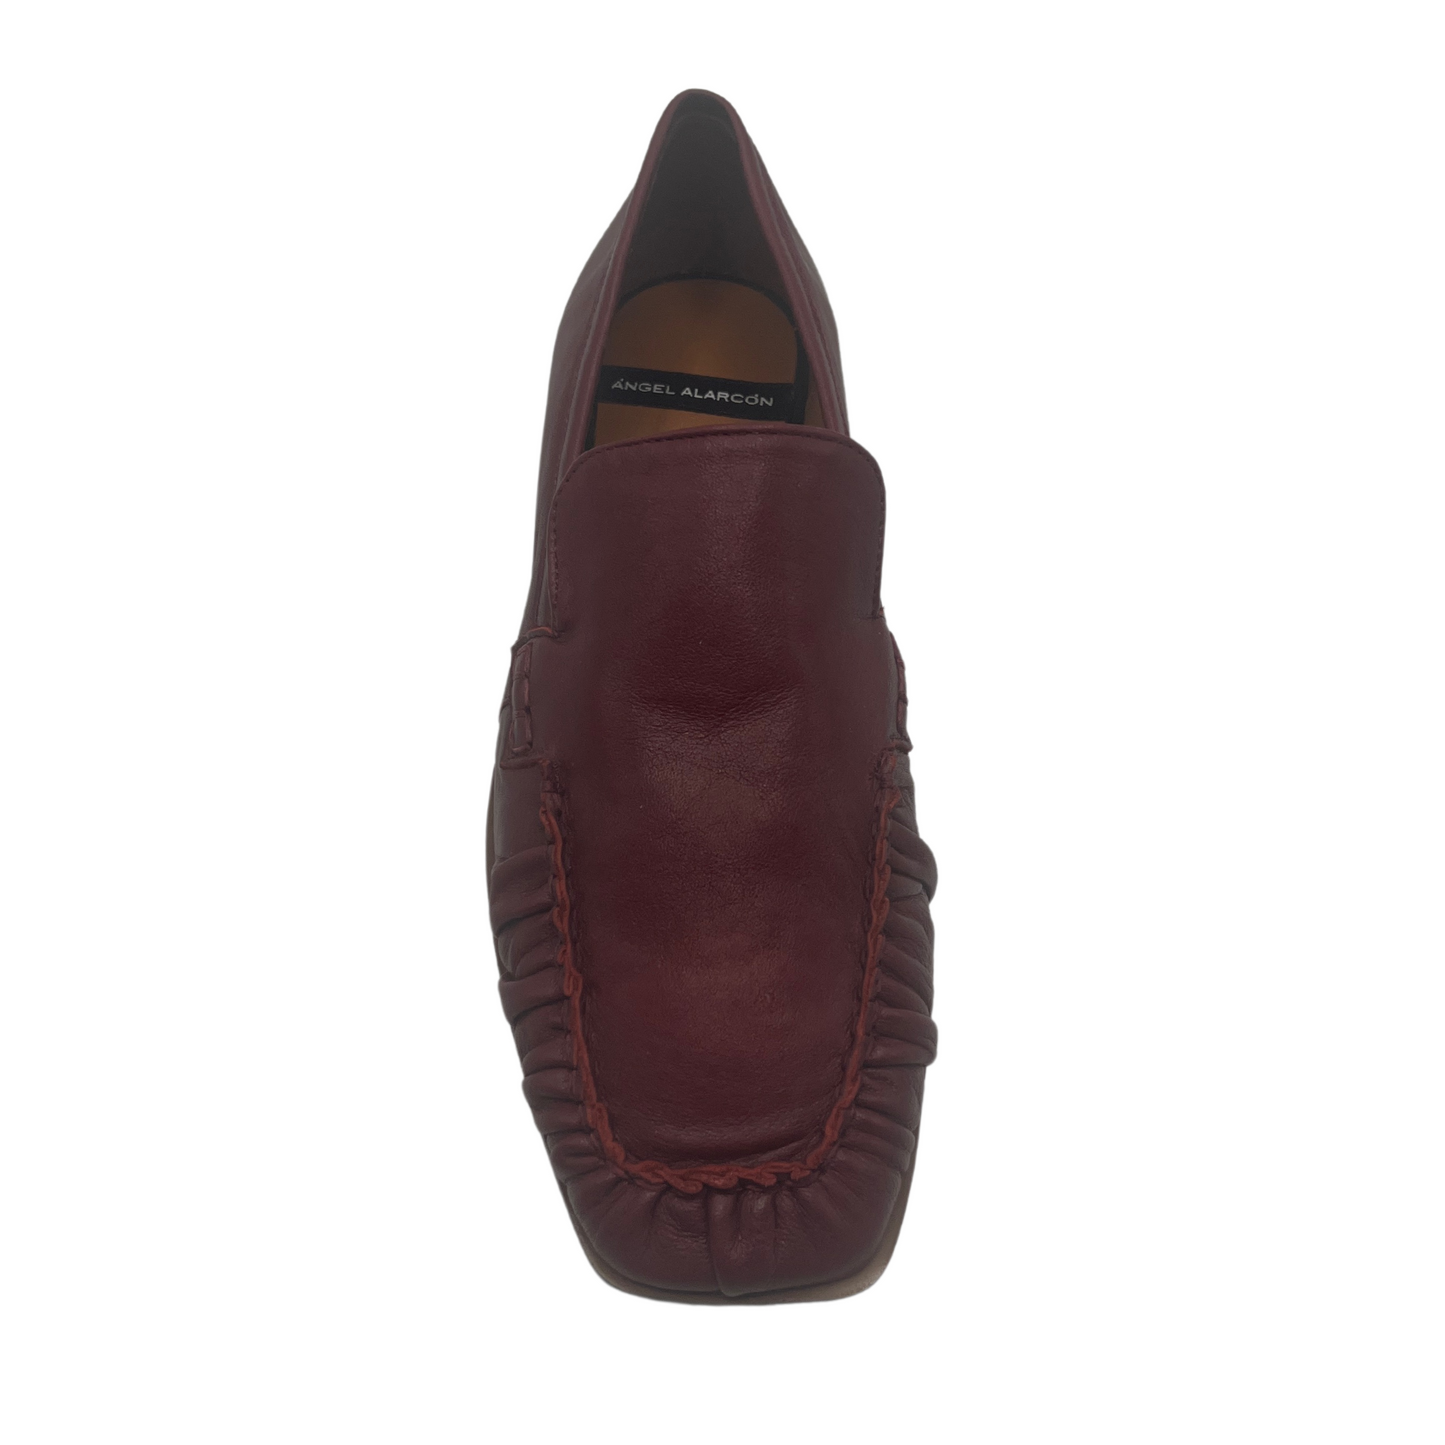 Top view of red leather loafer with square toe